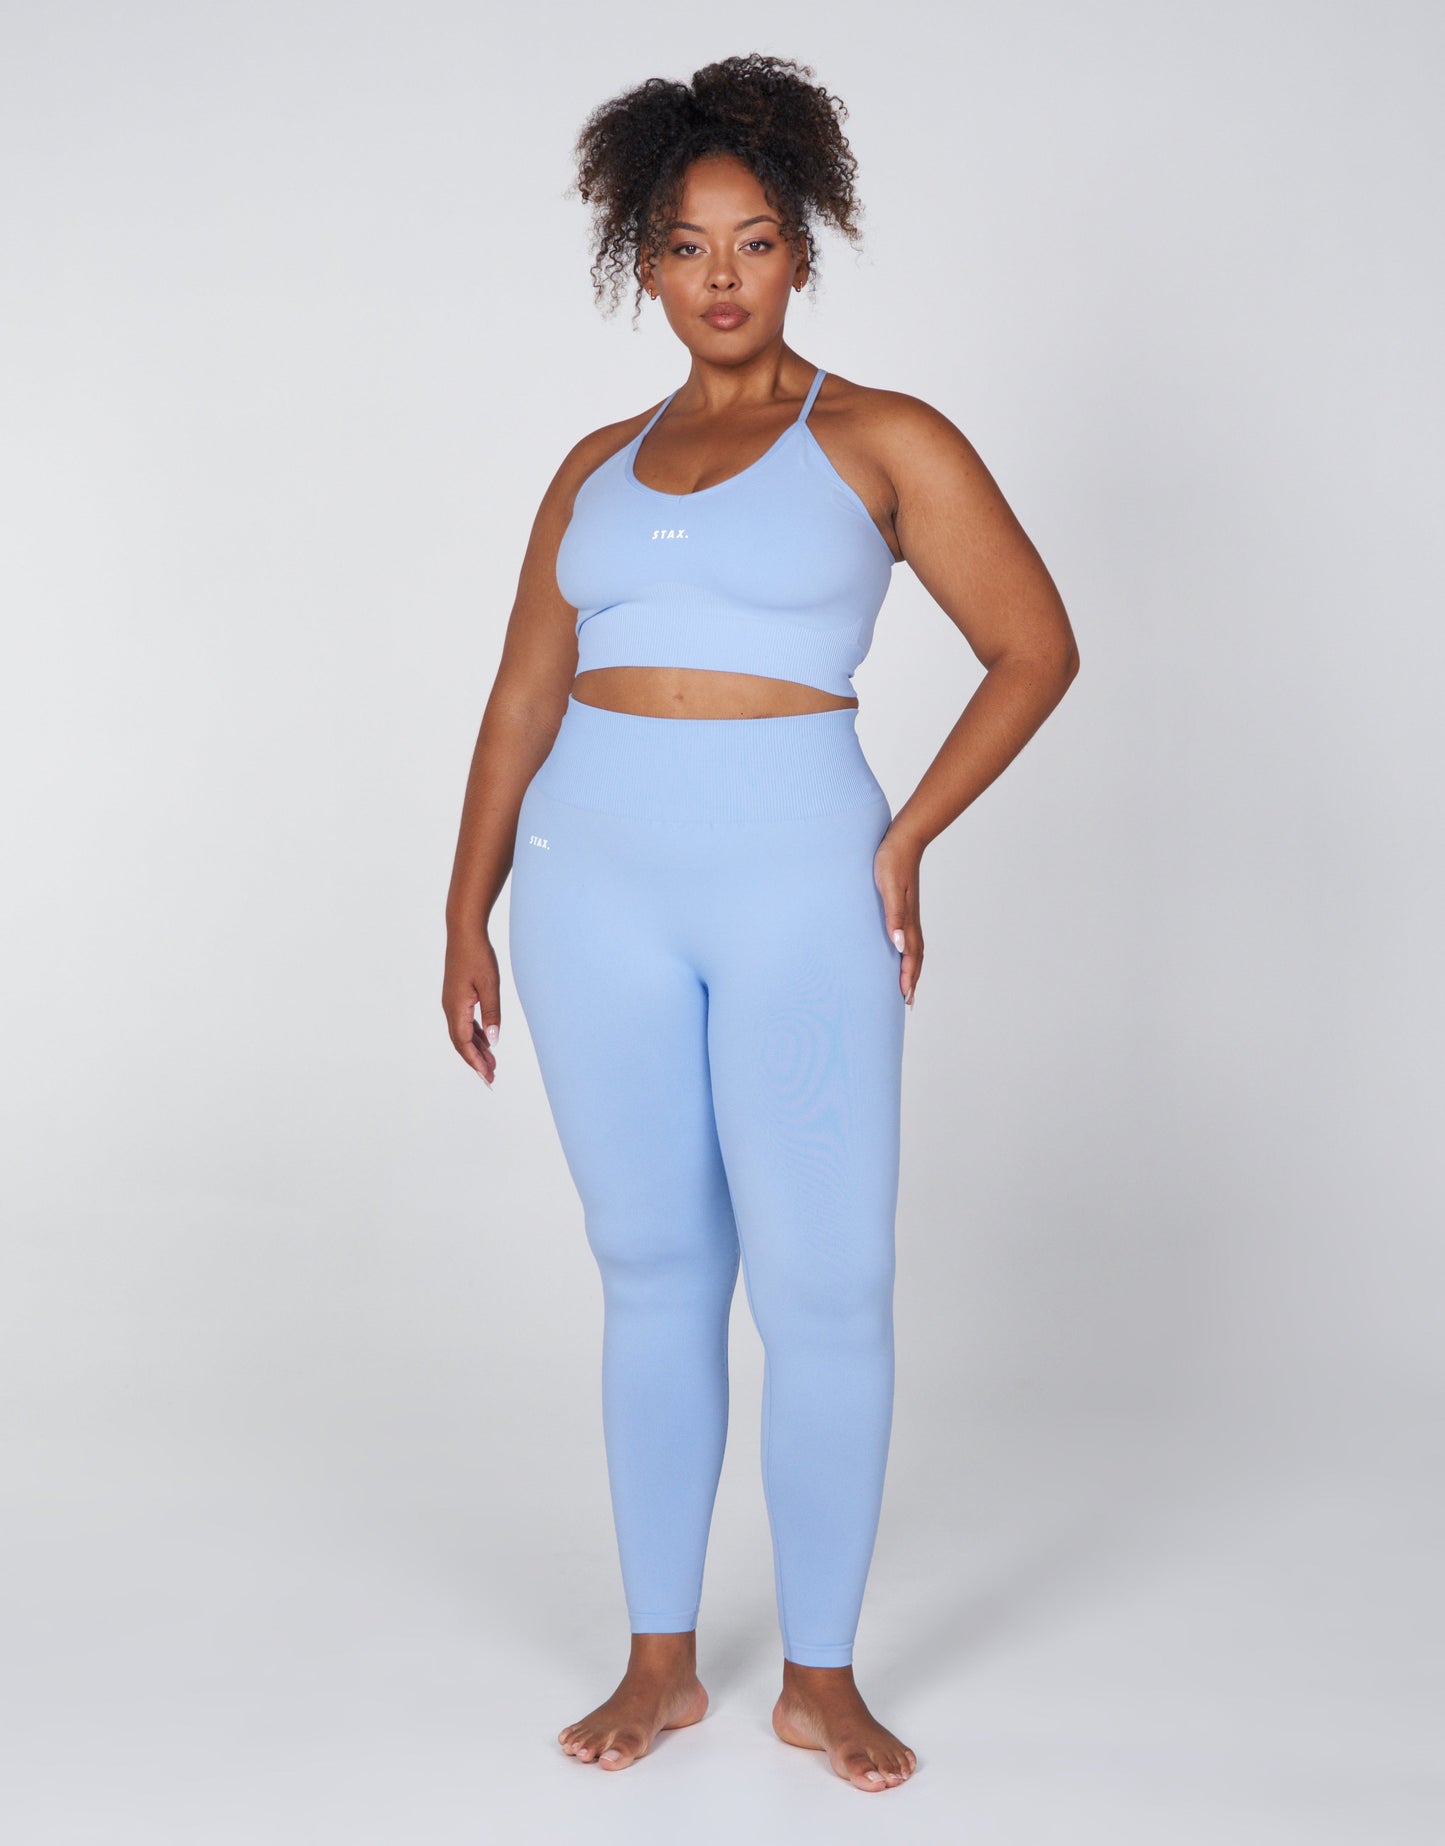 STAX. PSF Strappy Crop - Baby blue